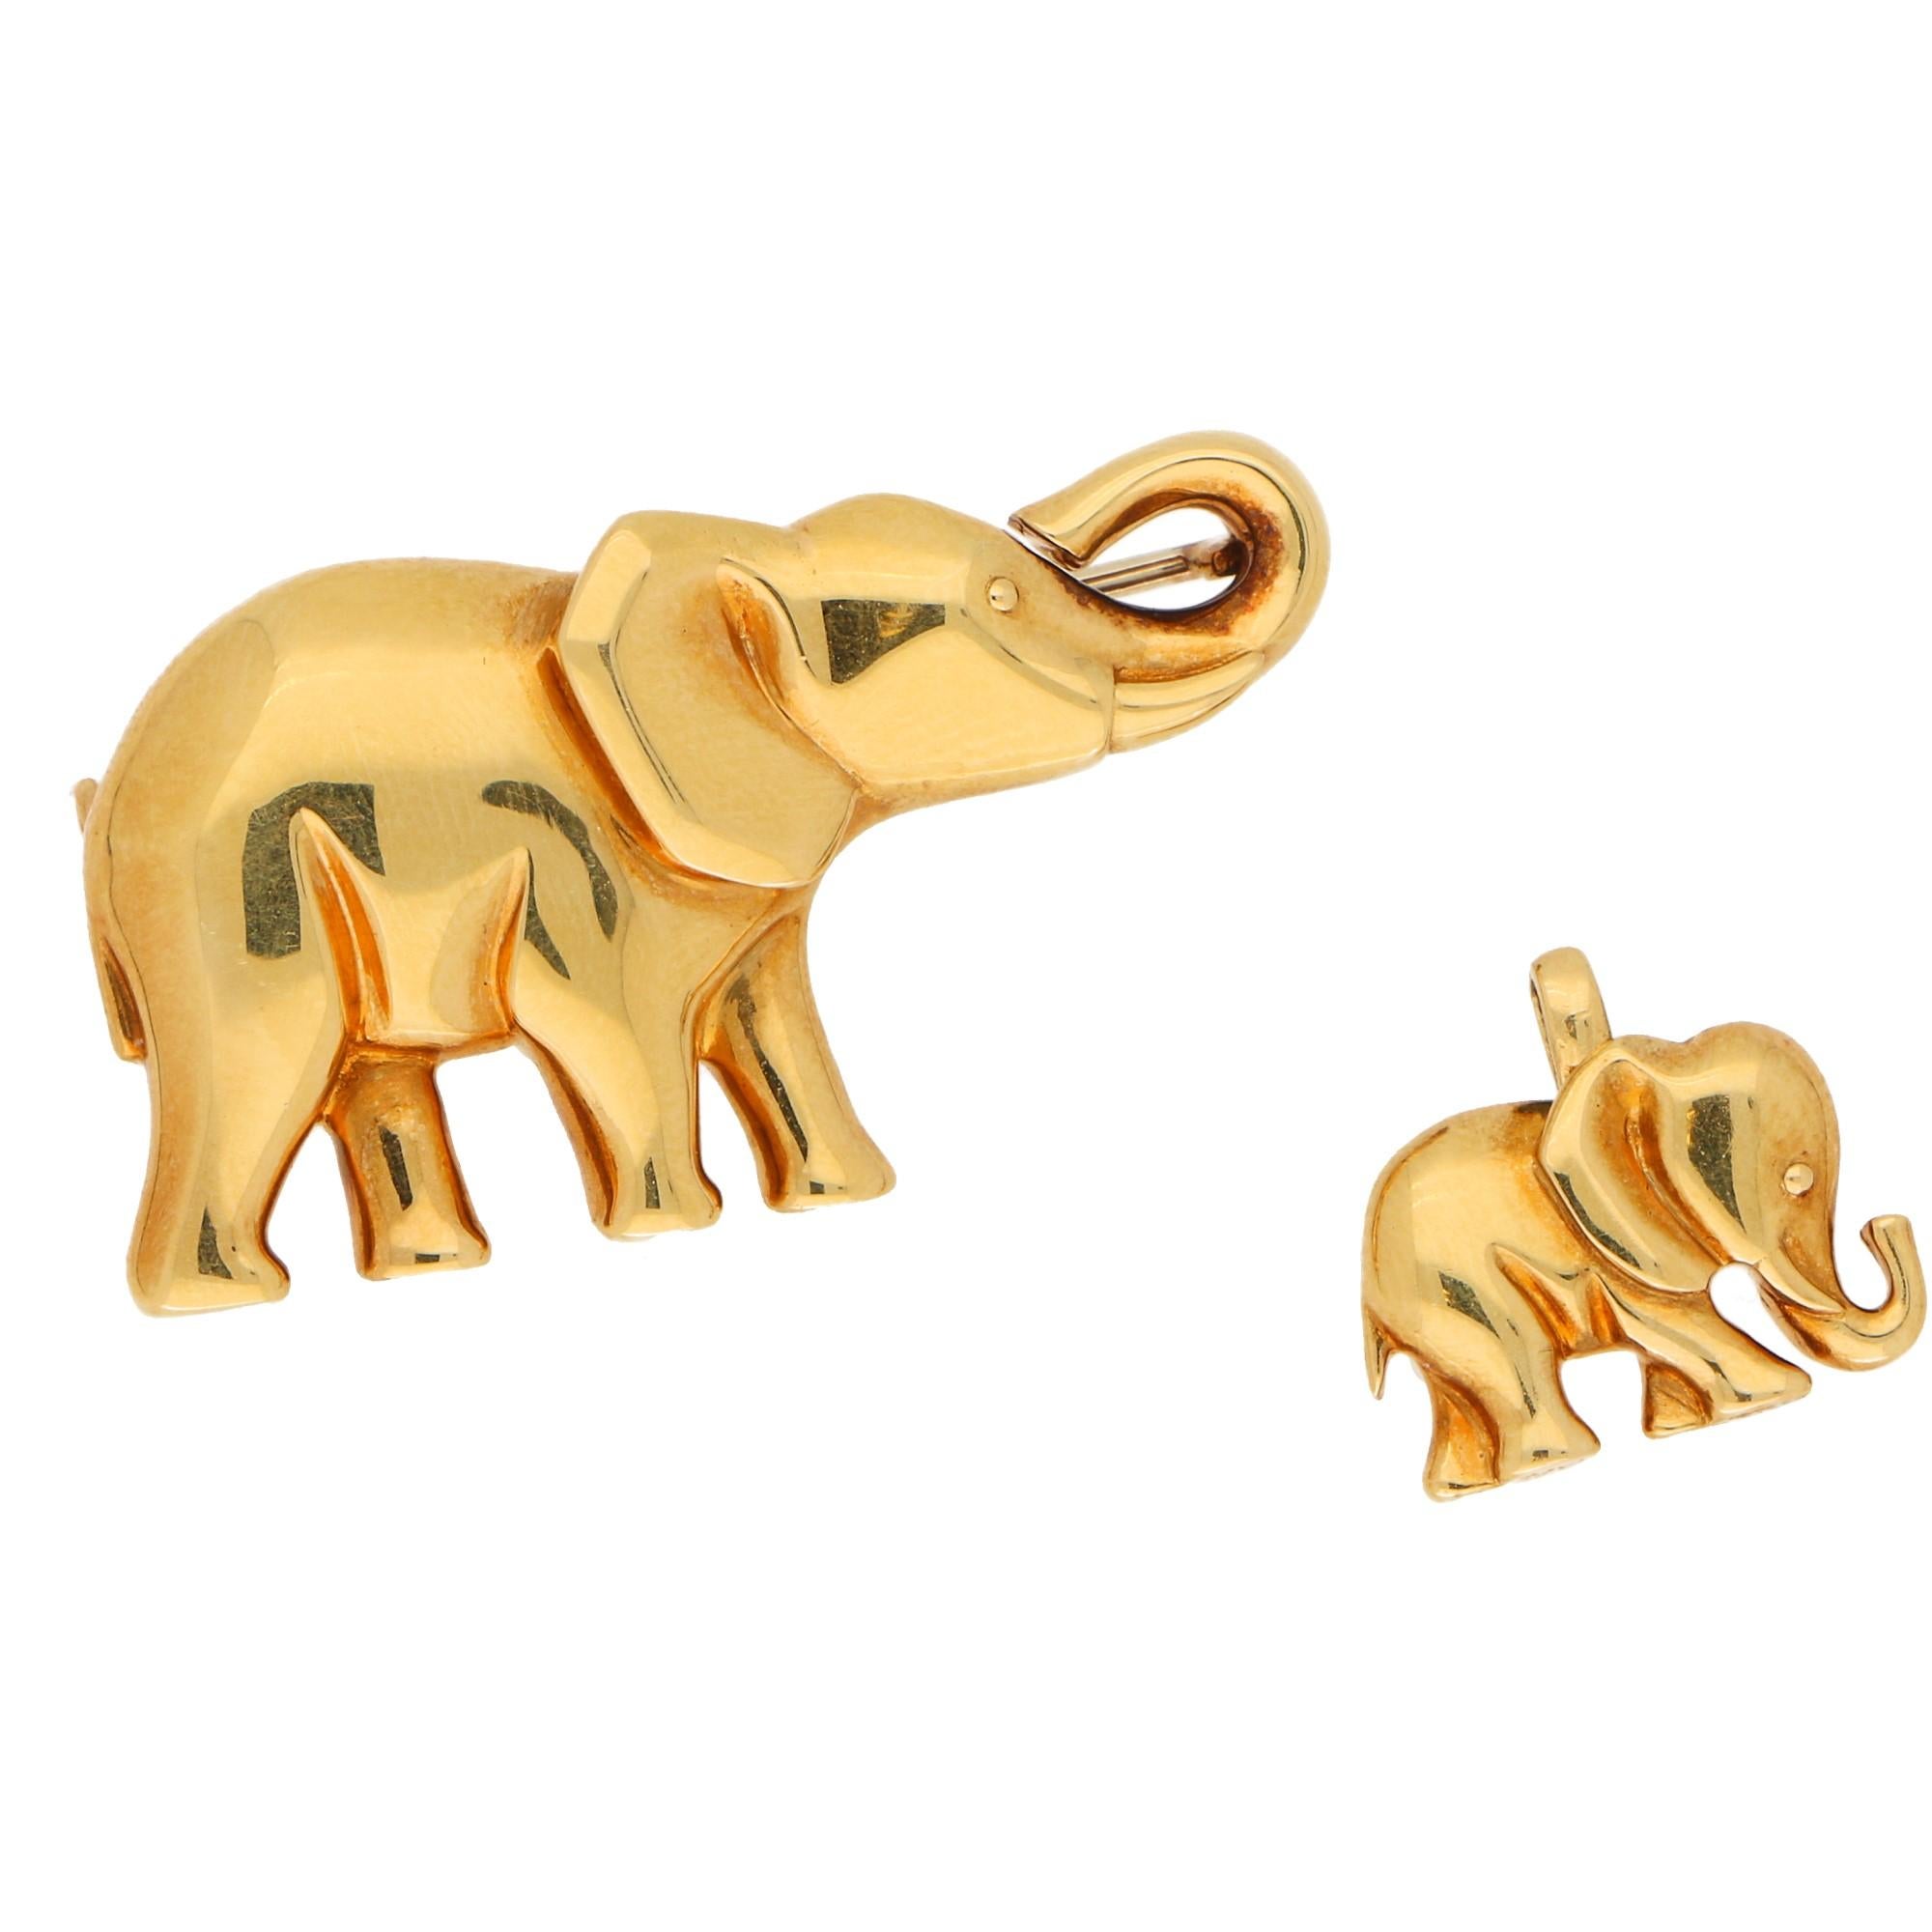 A charming Cartier elephant with calf brooch set in 18 karat yellow gold, circa 1990. The brooch is designed as an adult mother elephant and its calf, in polished yellow gold. 

The reason this brooch is so beautiful is down to the design! The calf